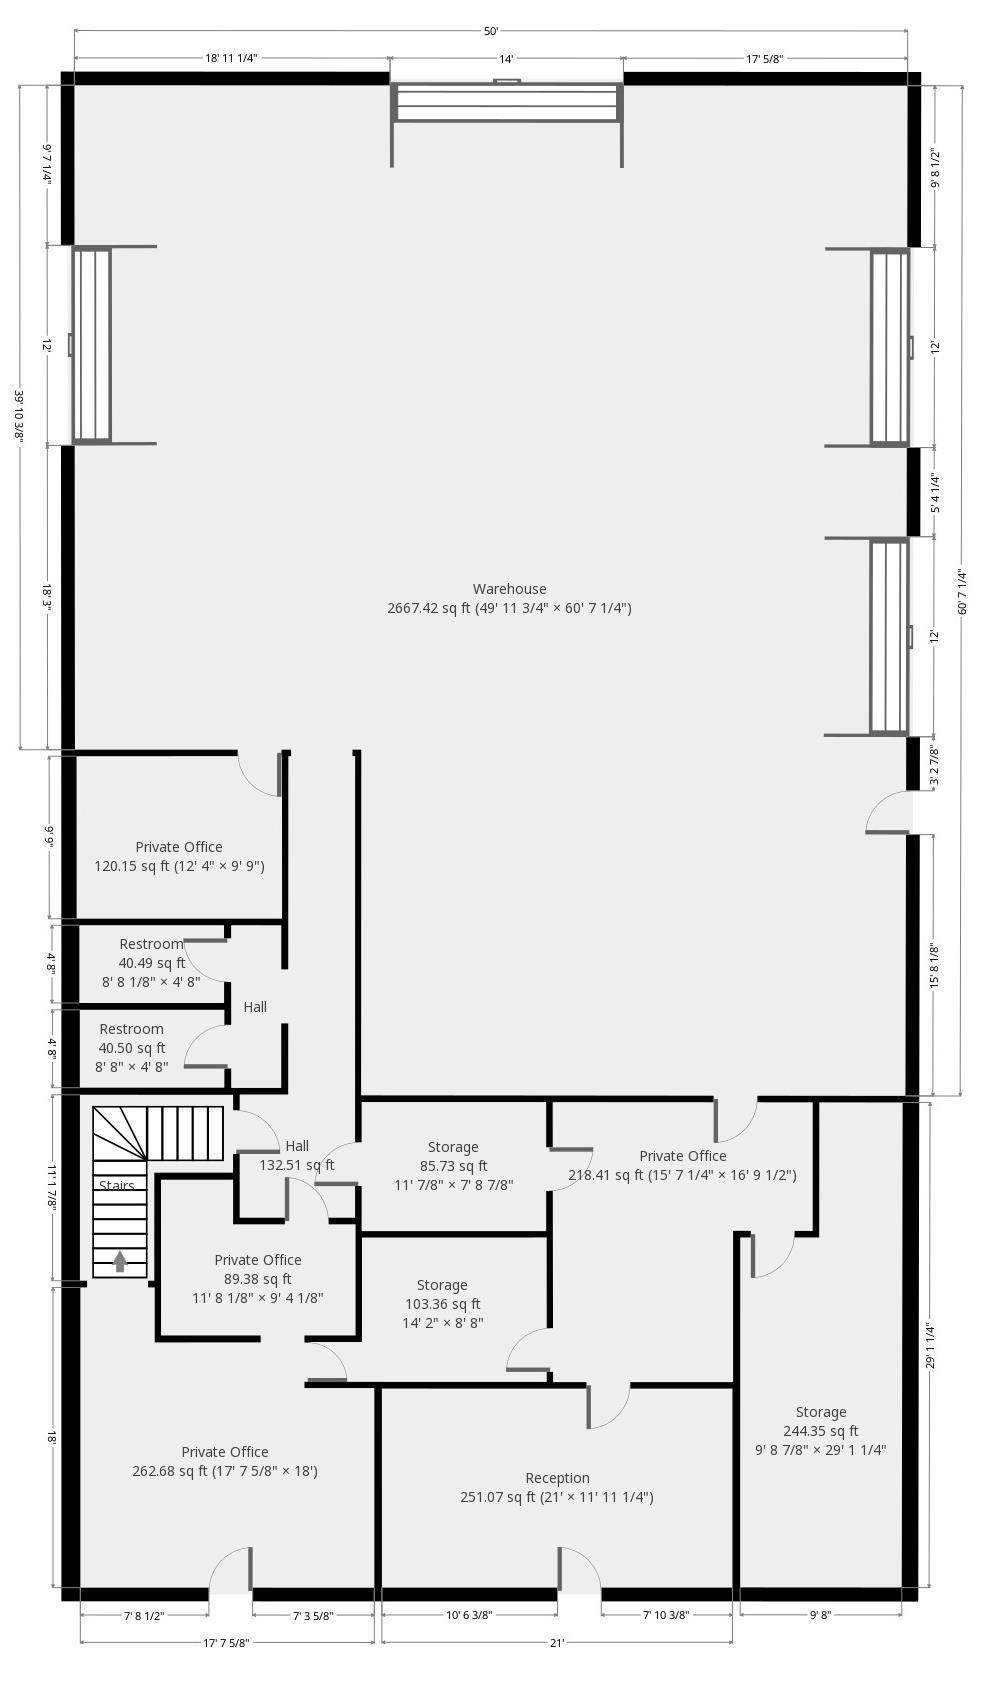 Stairs to 2 nd Story (Not for lease) Floor Plan* Private Office Restroom Restroom Private Office Private Office Front Entrance Storage Warehouse Happy Tails Grooming